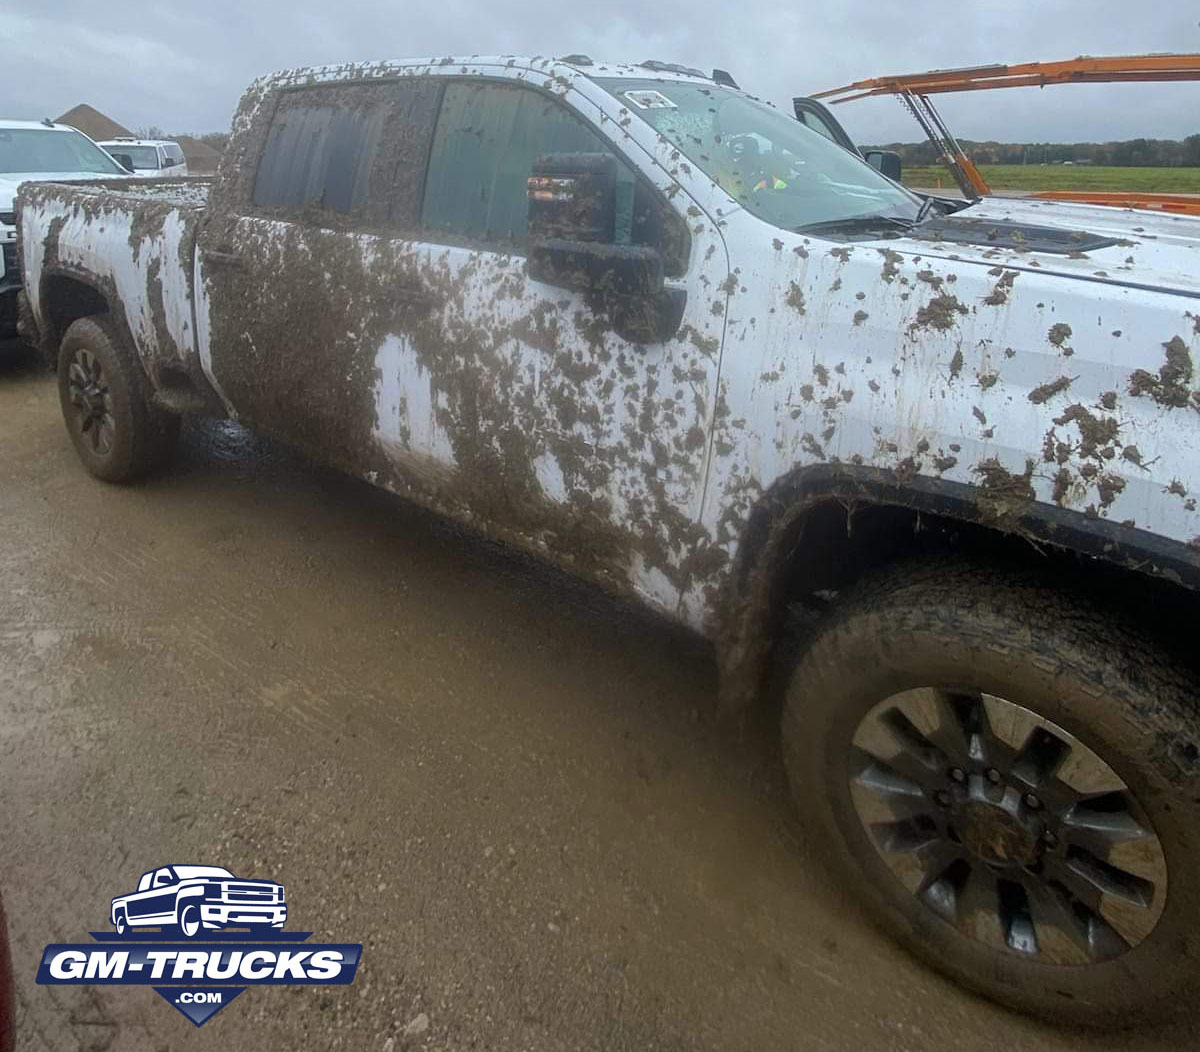 Brand New 2021 HD Trucks Covered In Mud After Being Stored In Field For Months